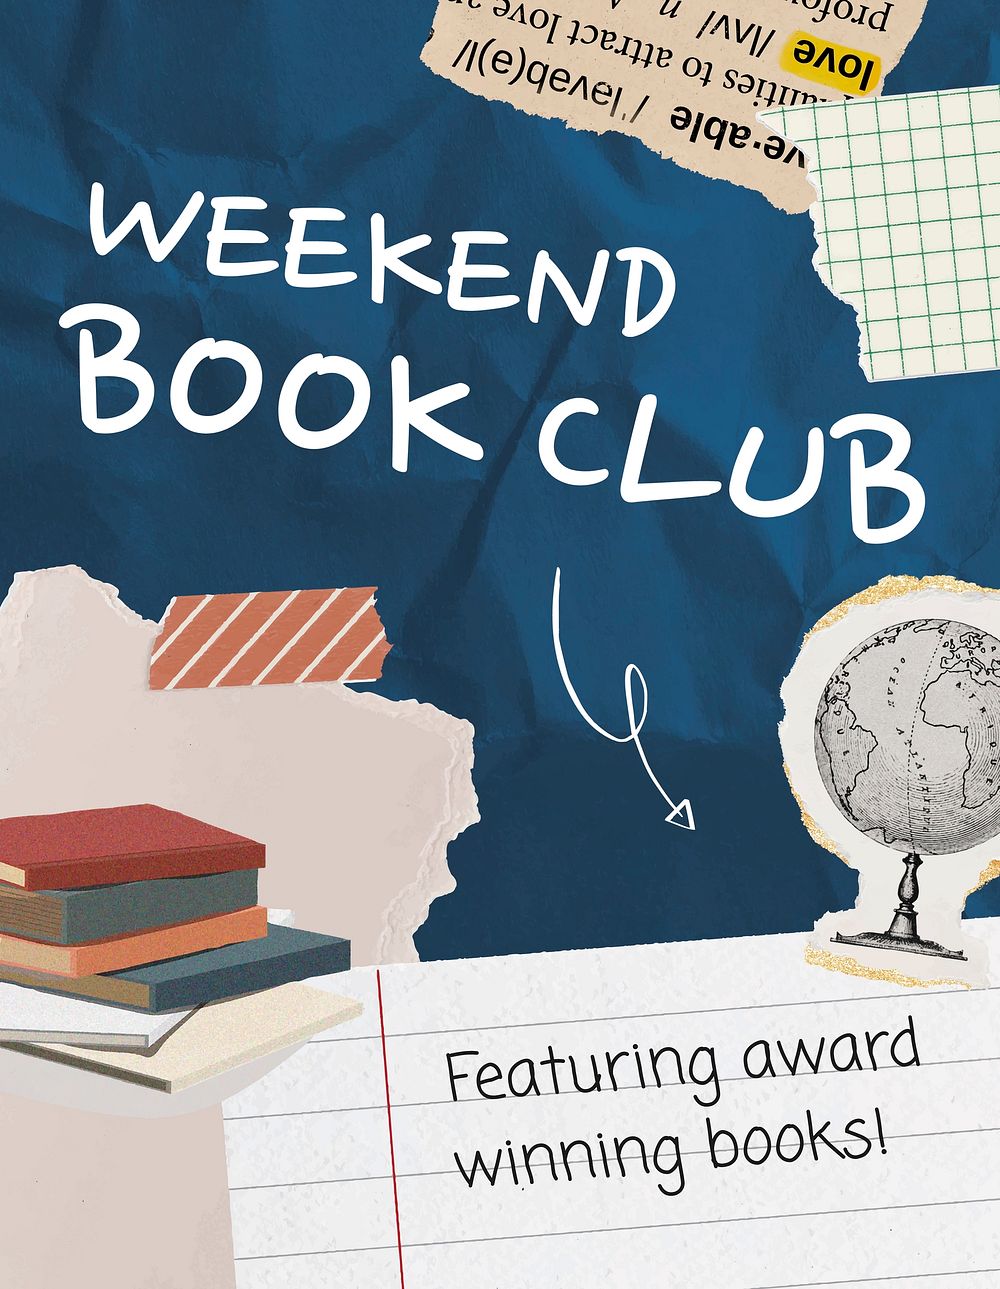 Book club flyer template, paper collage design vector